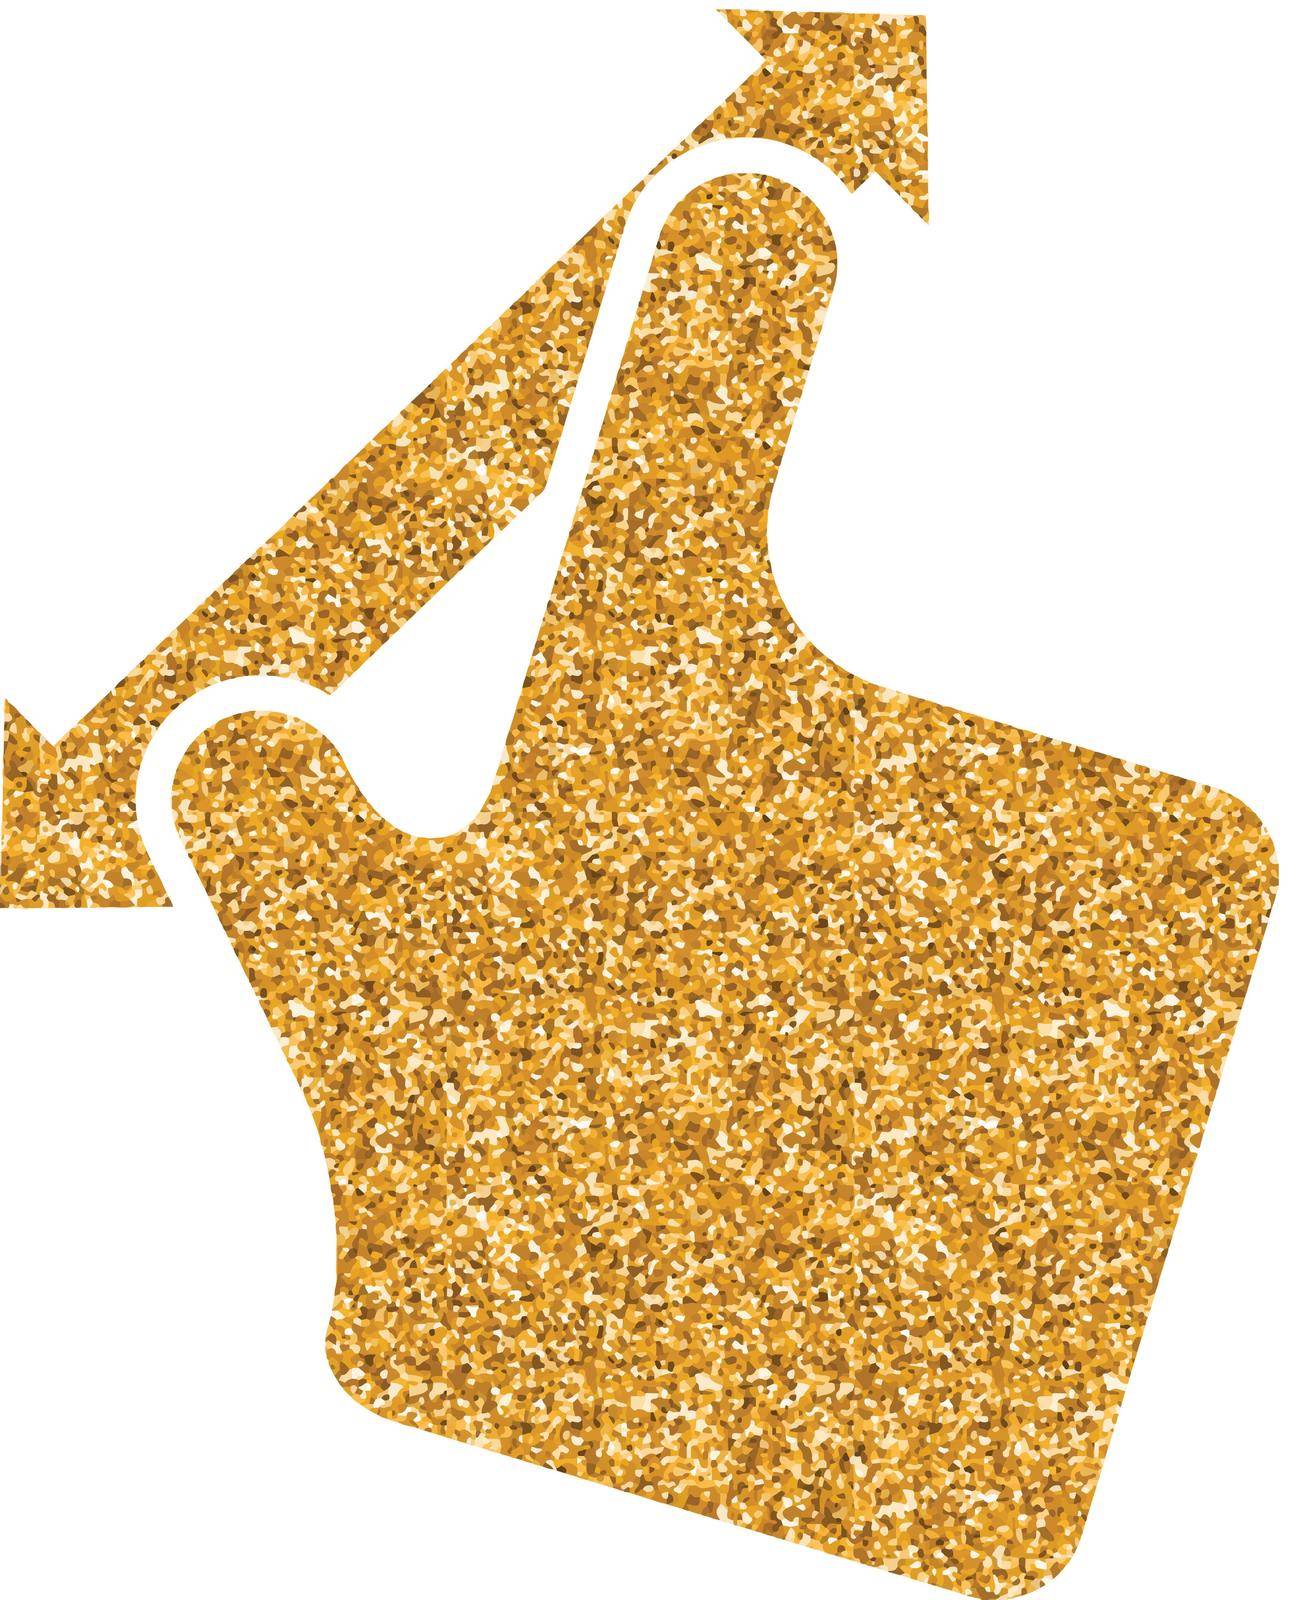 Gold Glitter Icon - Gesture by puruan